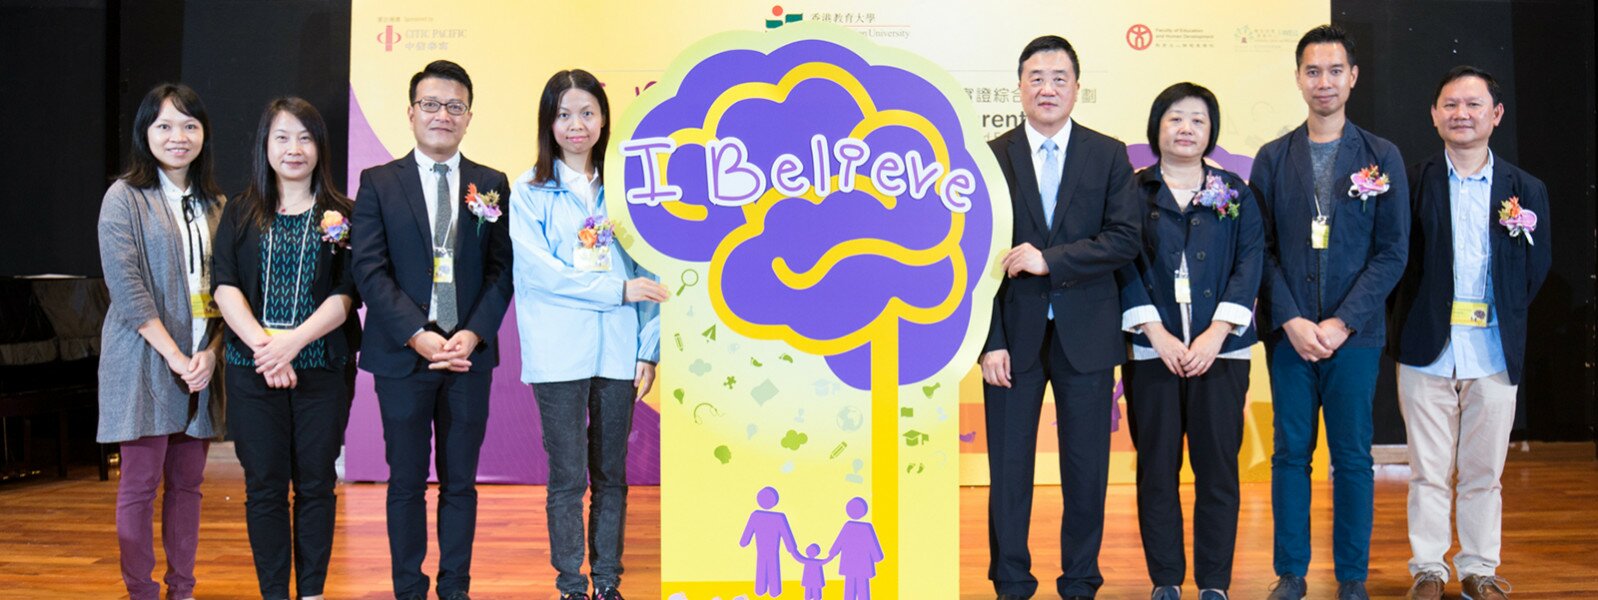 Kick-off Ceremony for ‘I Believe’ Walk with Parents: Evidence-based Integrated Education Programme